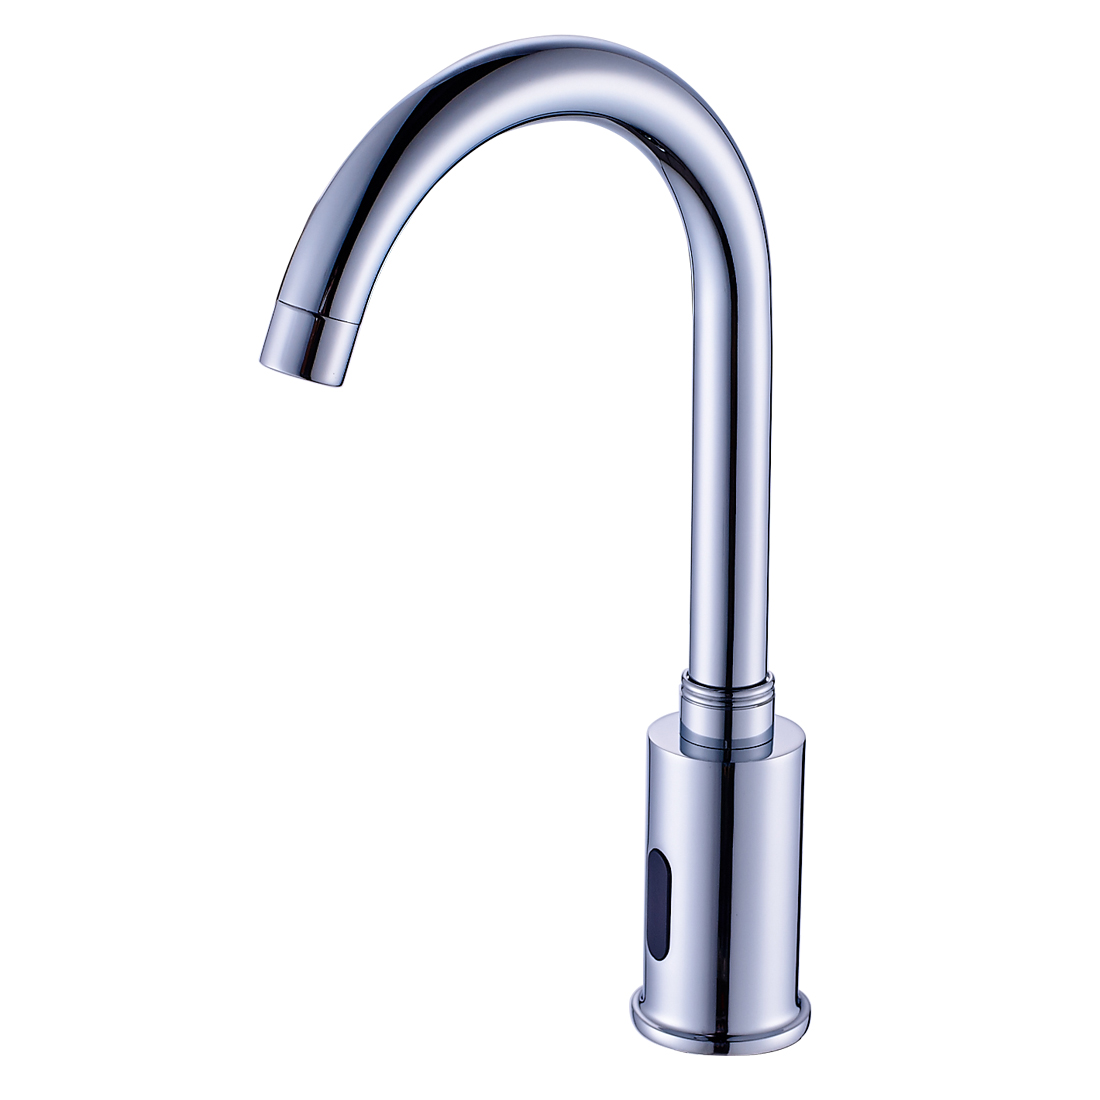 FLG High Quality Automatic Faucet Chrome Touchless Bathroom Basin Faucet